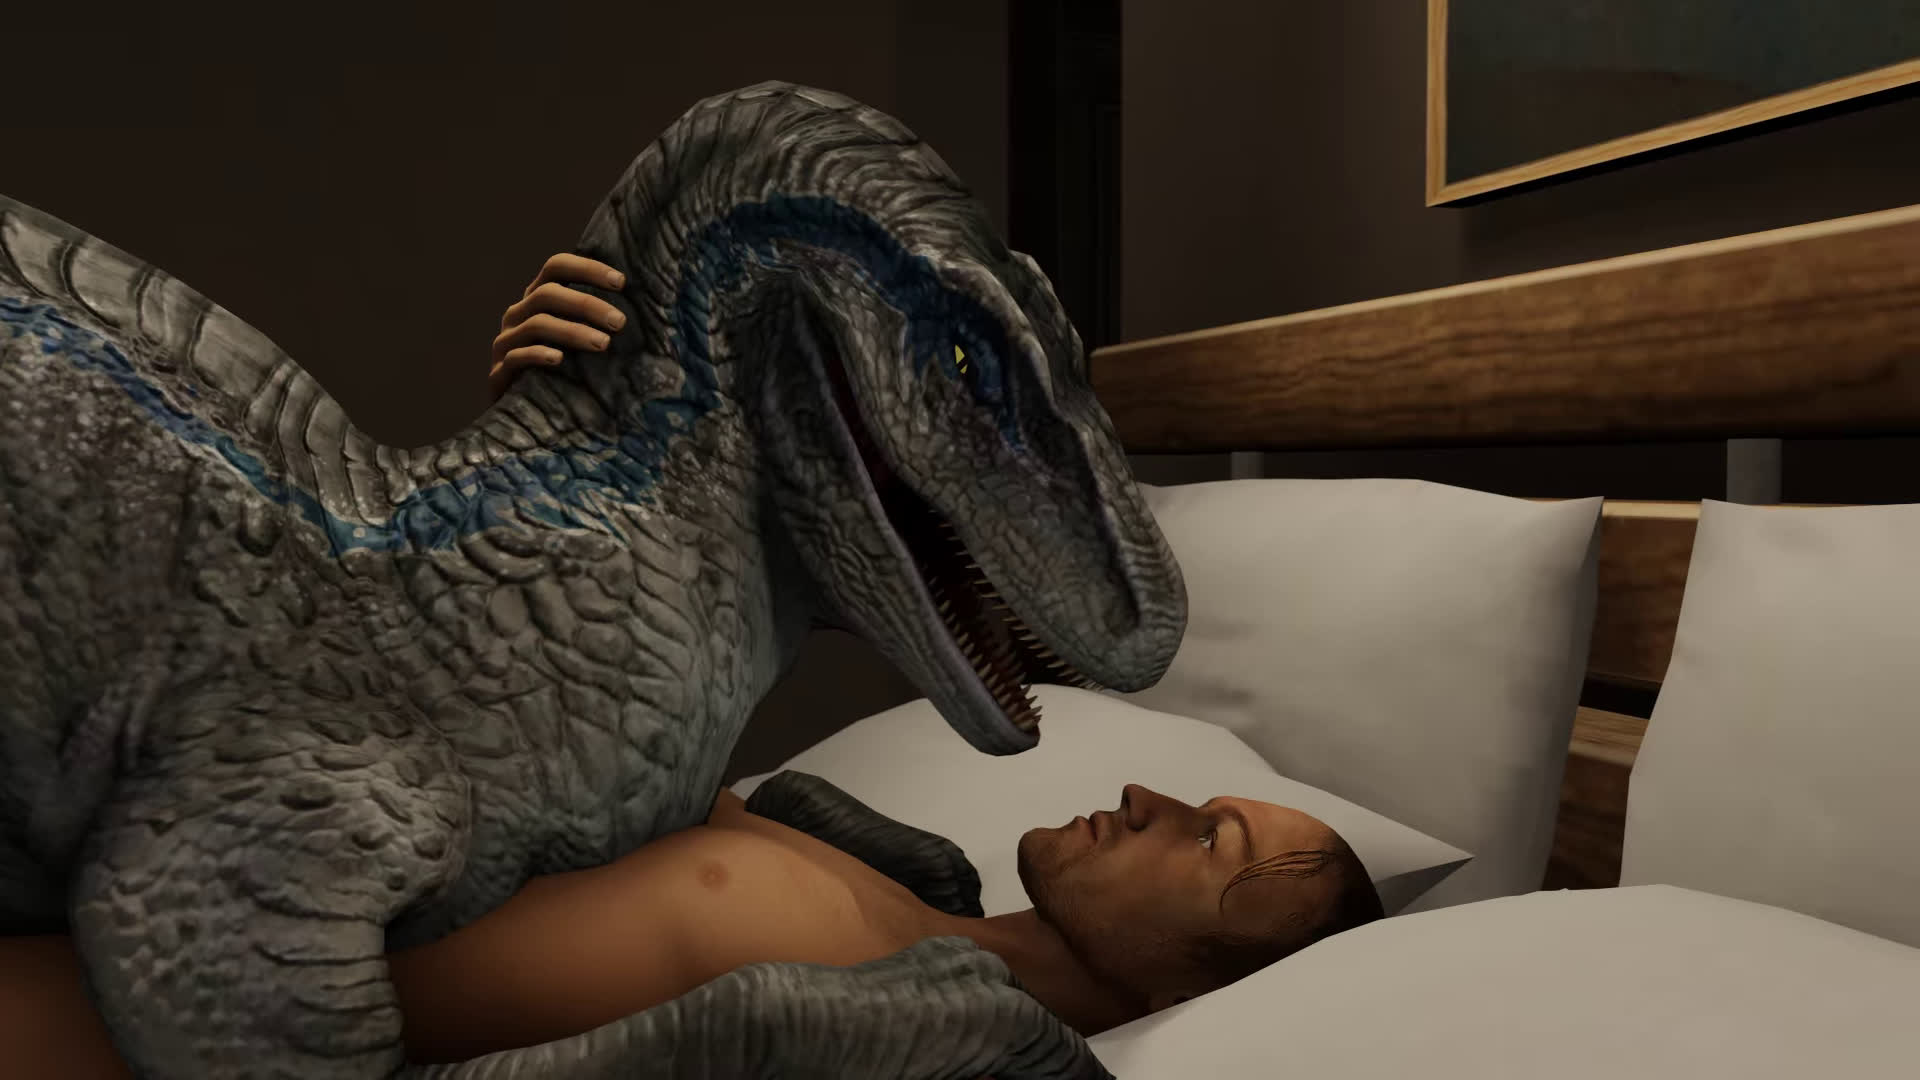 Watch Jurassic World 3 Online and Fulfill Your Wildest Fantasies!